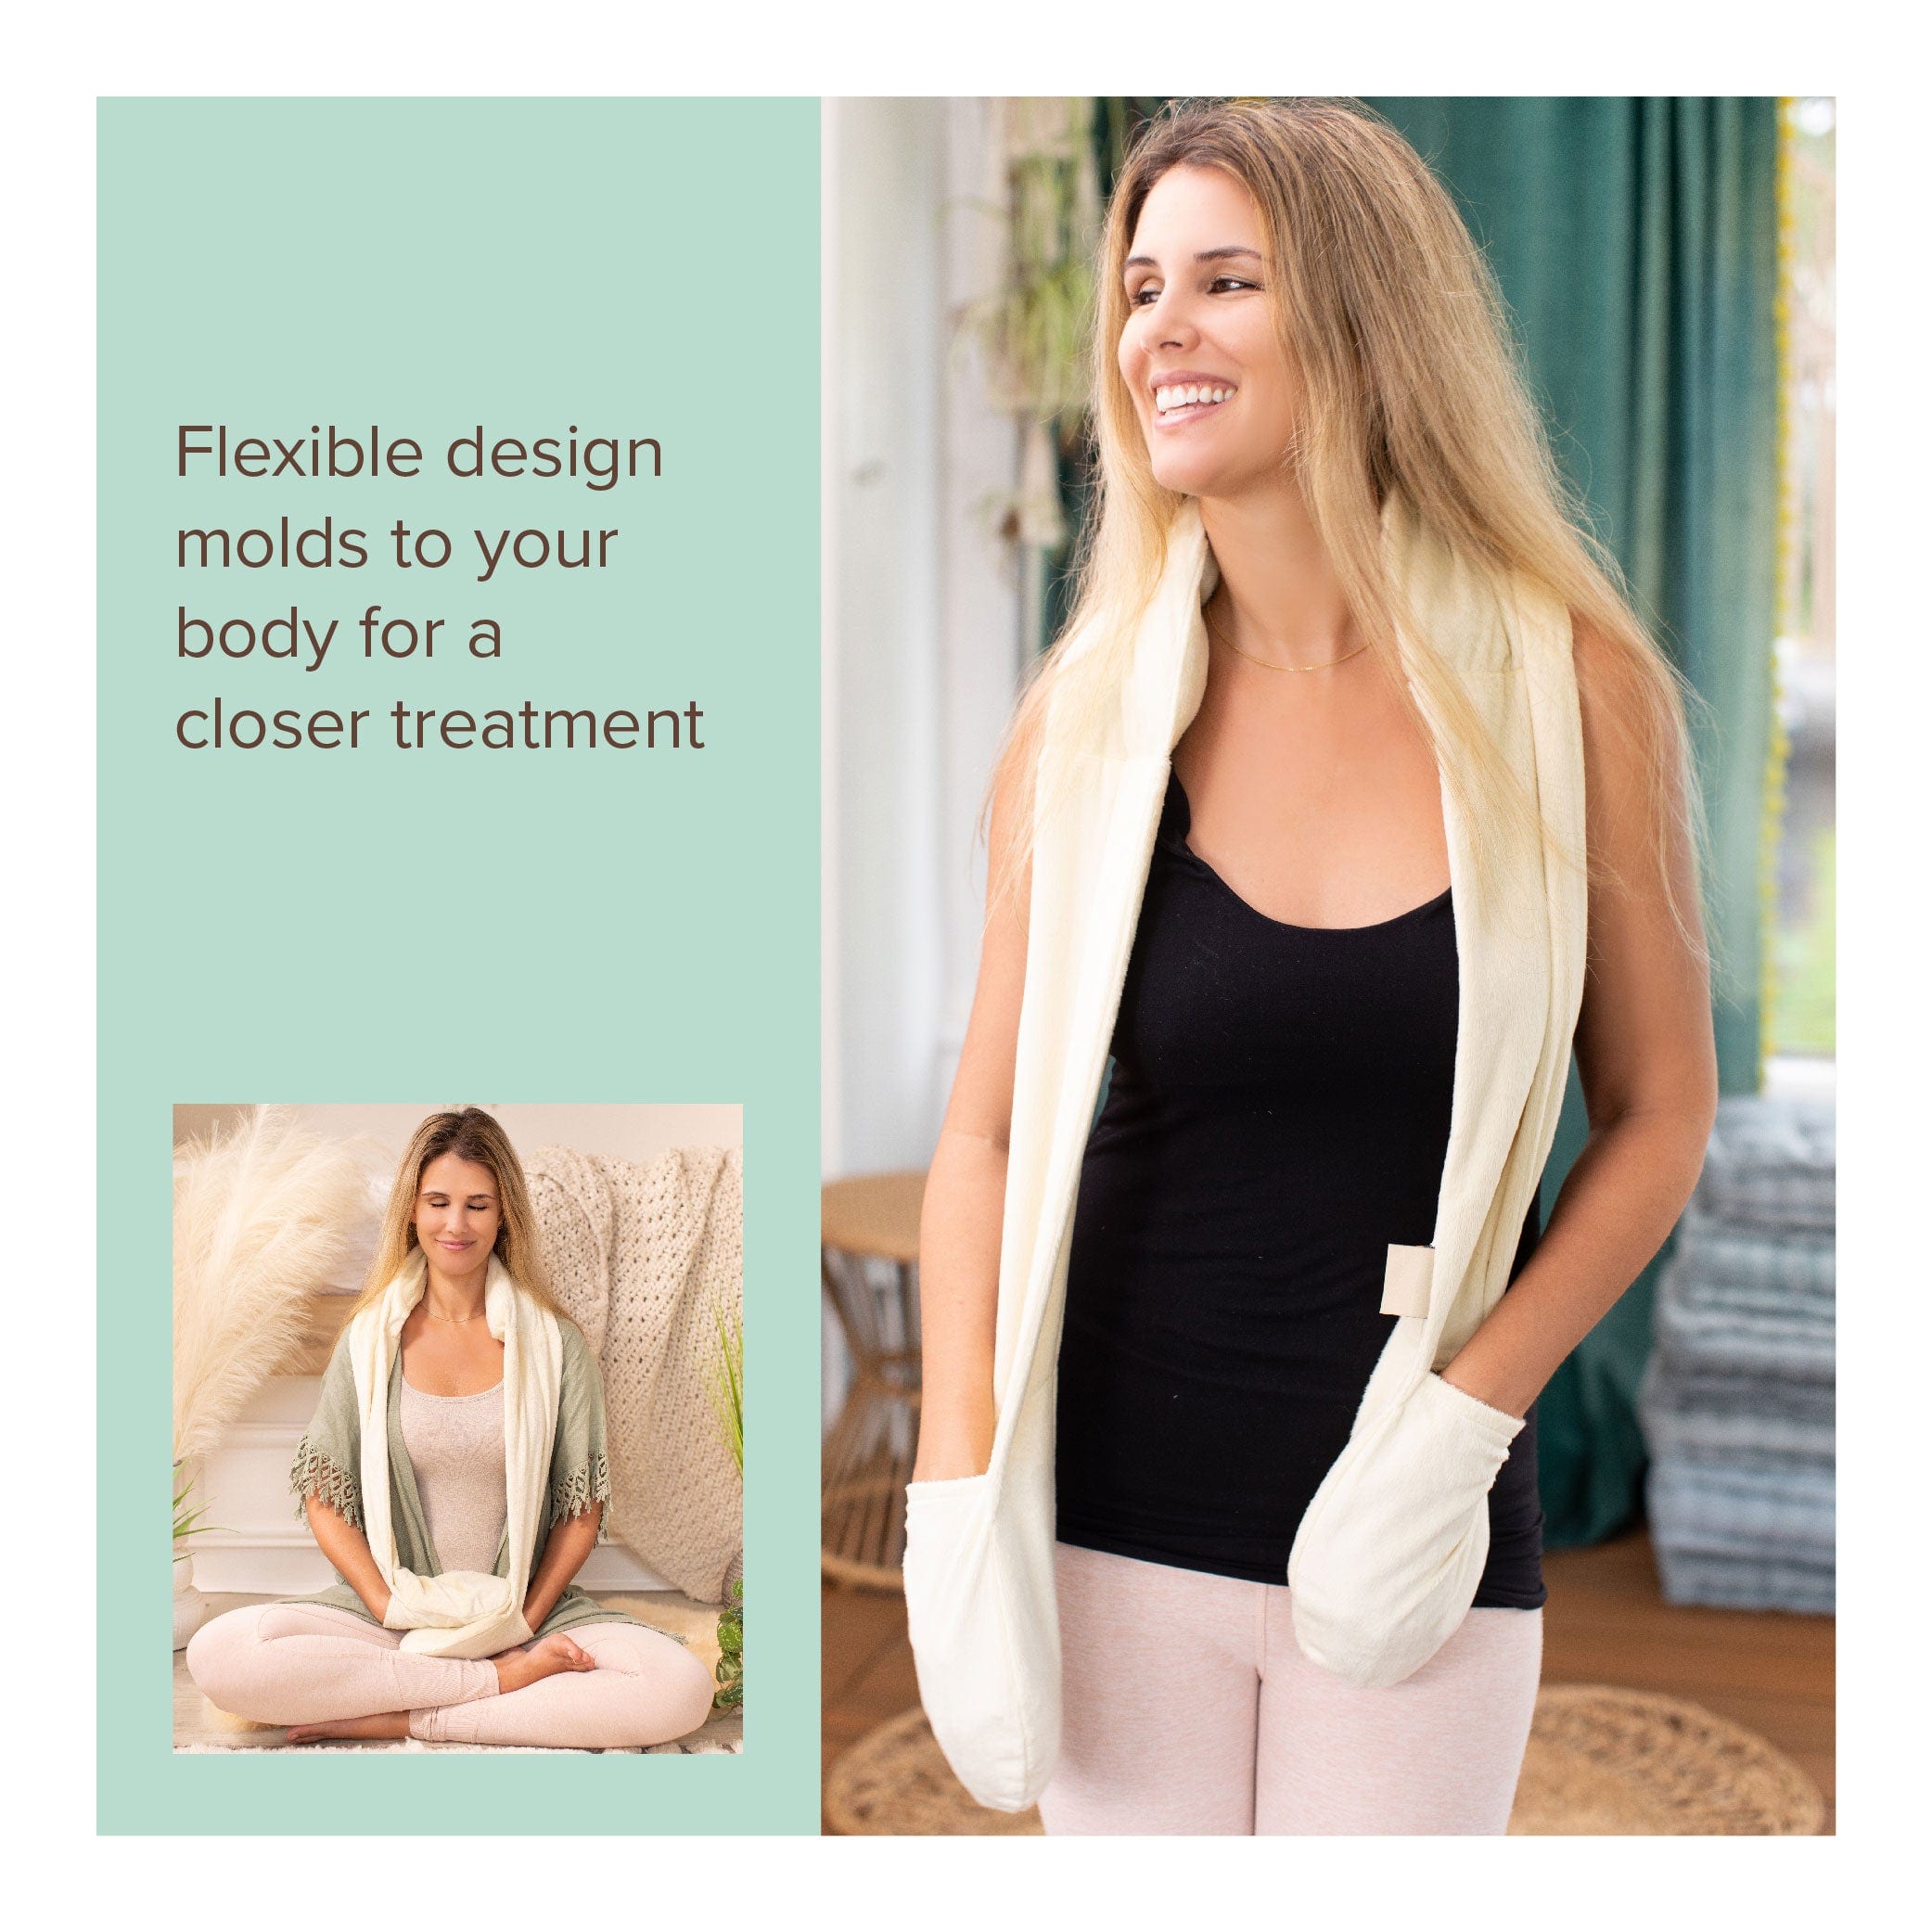 Bed Buddy Neck & Hand Wrap - Flexible design molds to your body for a closer treatment